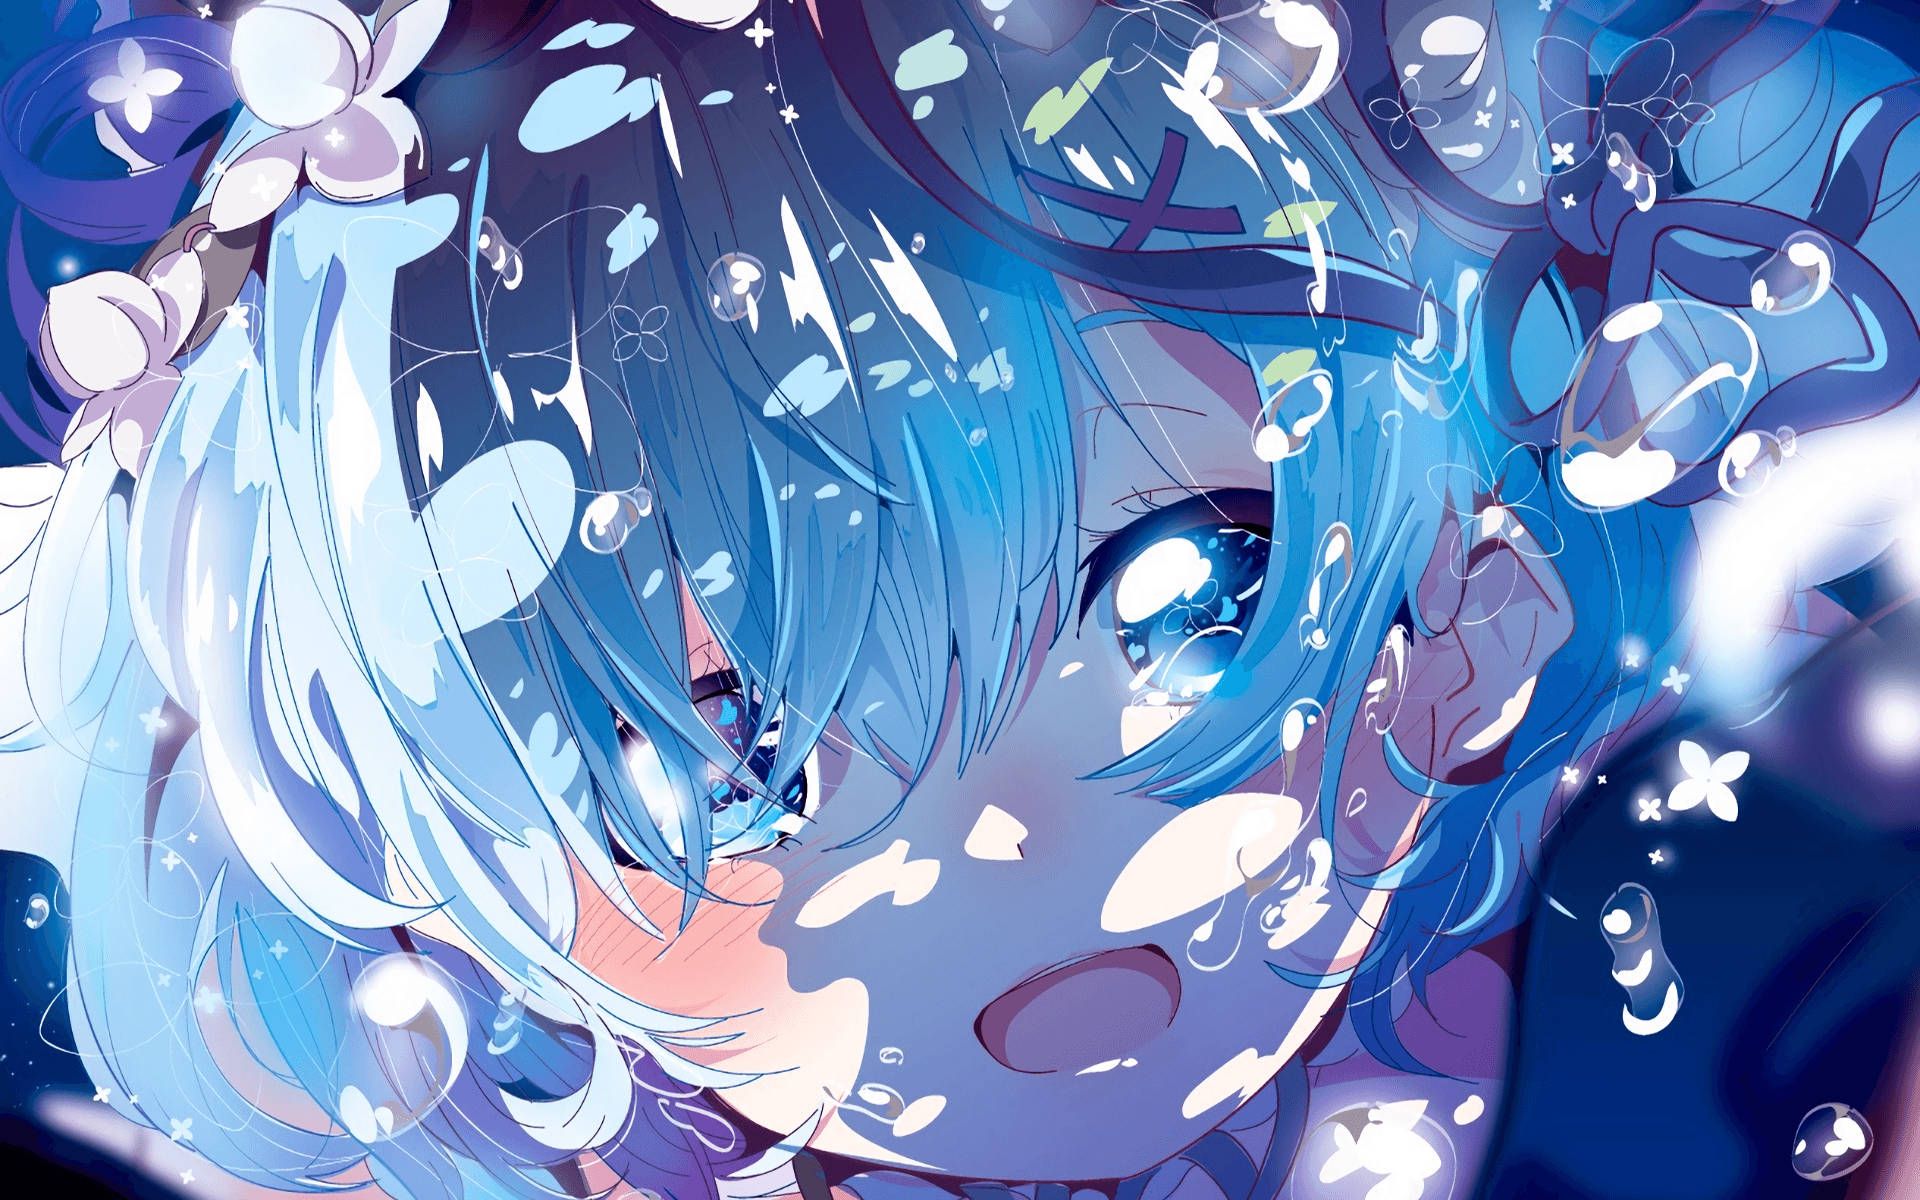 Anime girl with blue hair and flowers in her face - Blue anime